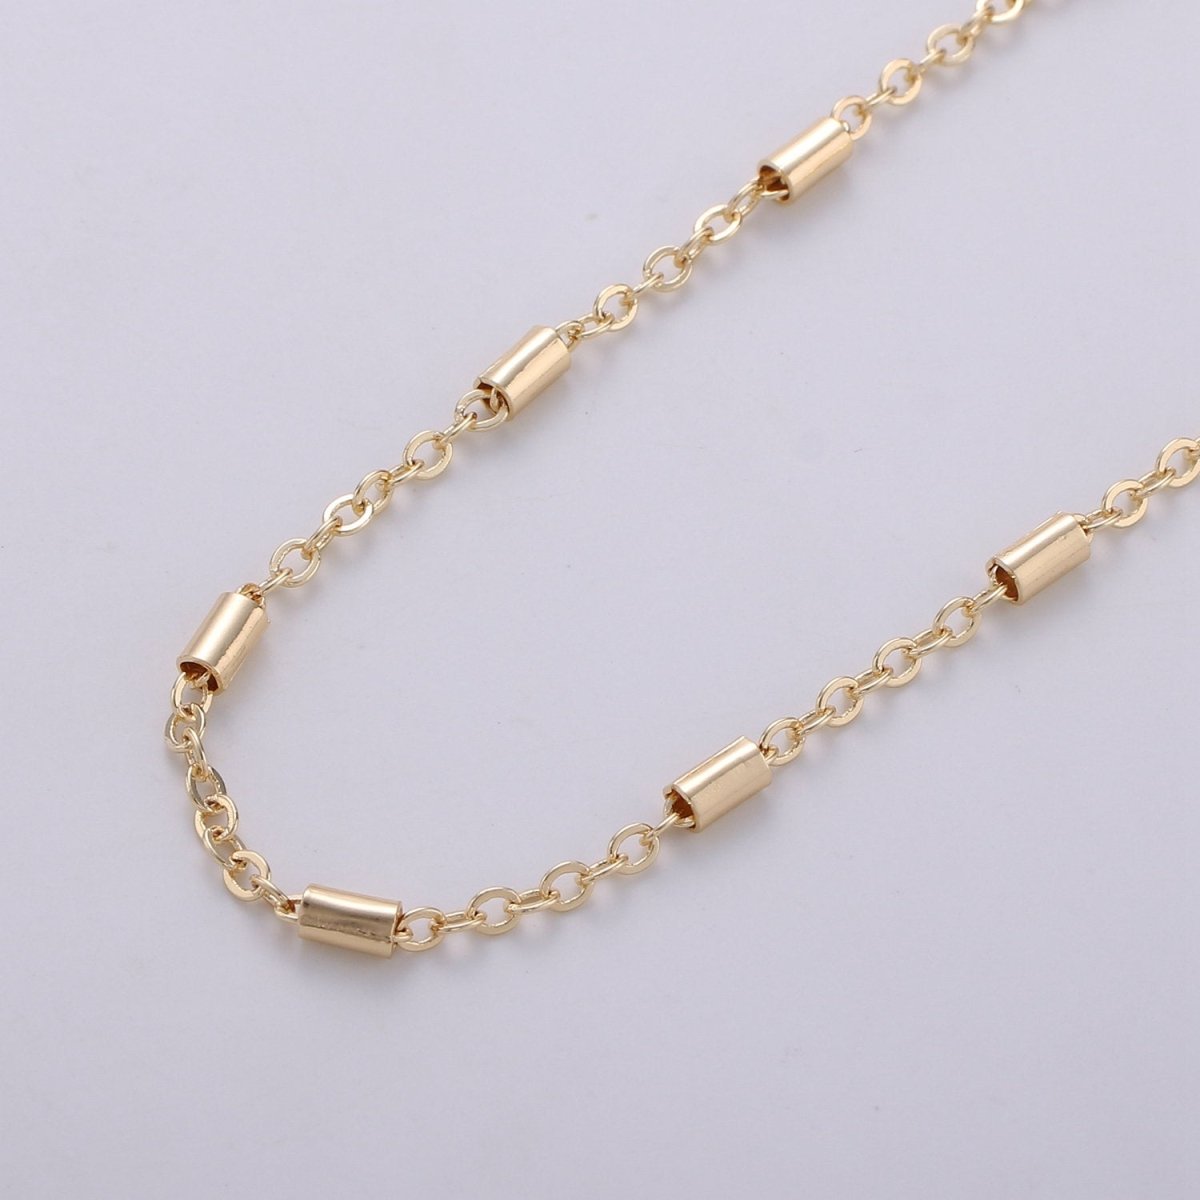 16K Gold Filled Rolo Chain, 4mm Long Tube Chain, Unfinished Rolo Chain For Jewelry, Necklace Bracelet Anklet Supply Component | ROLL-246 - DLUXCA